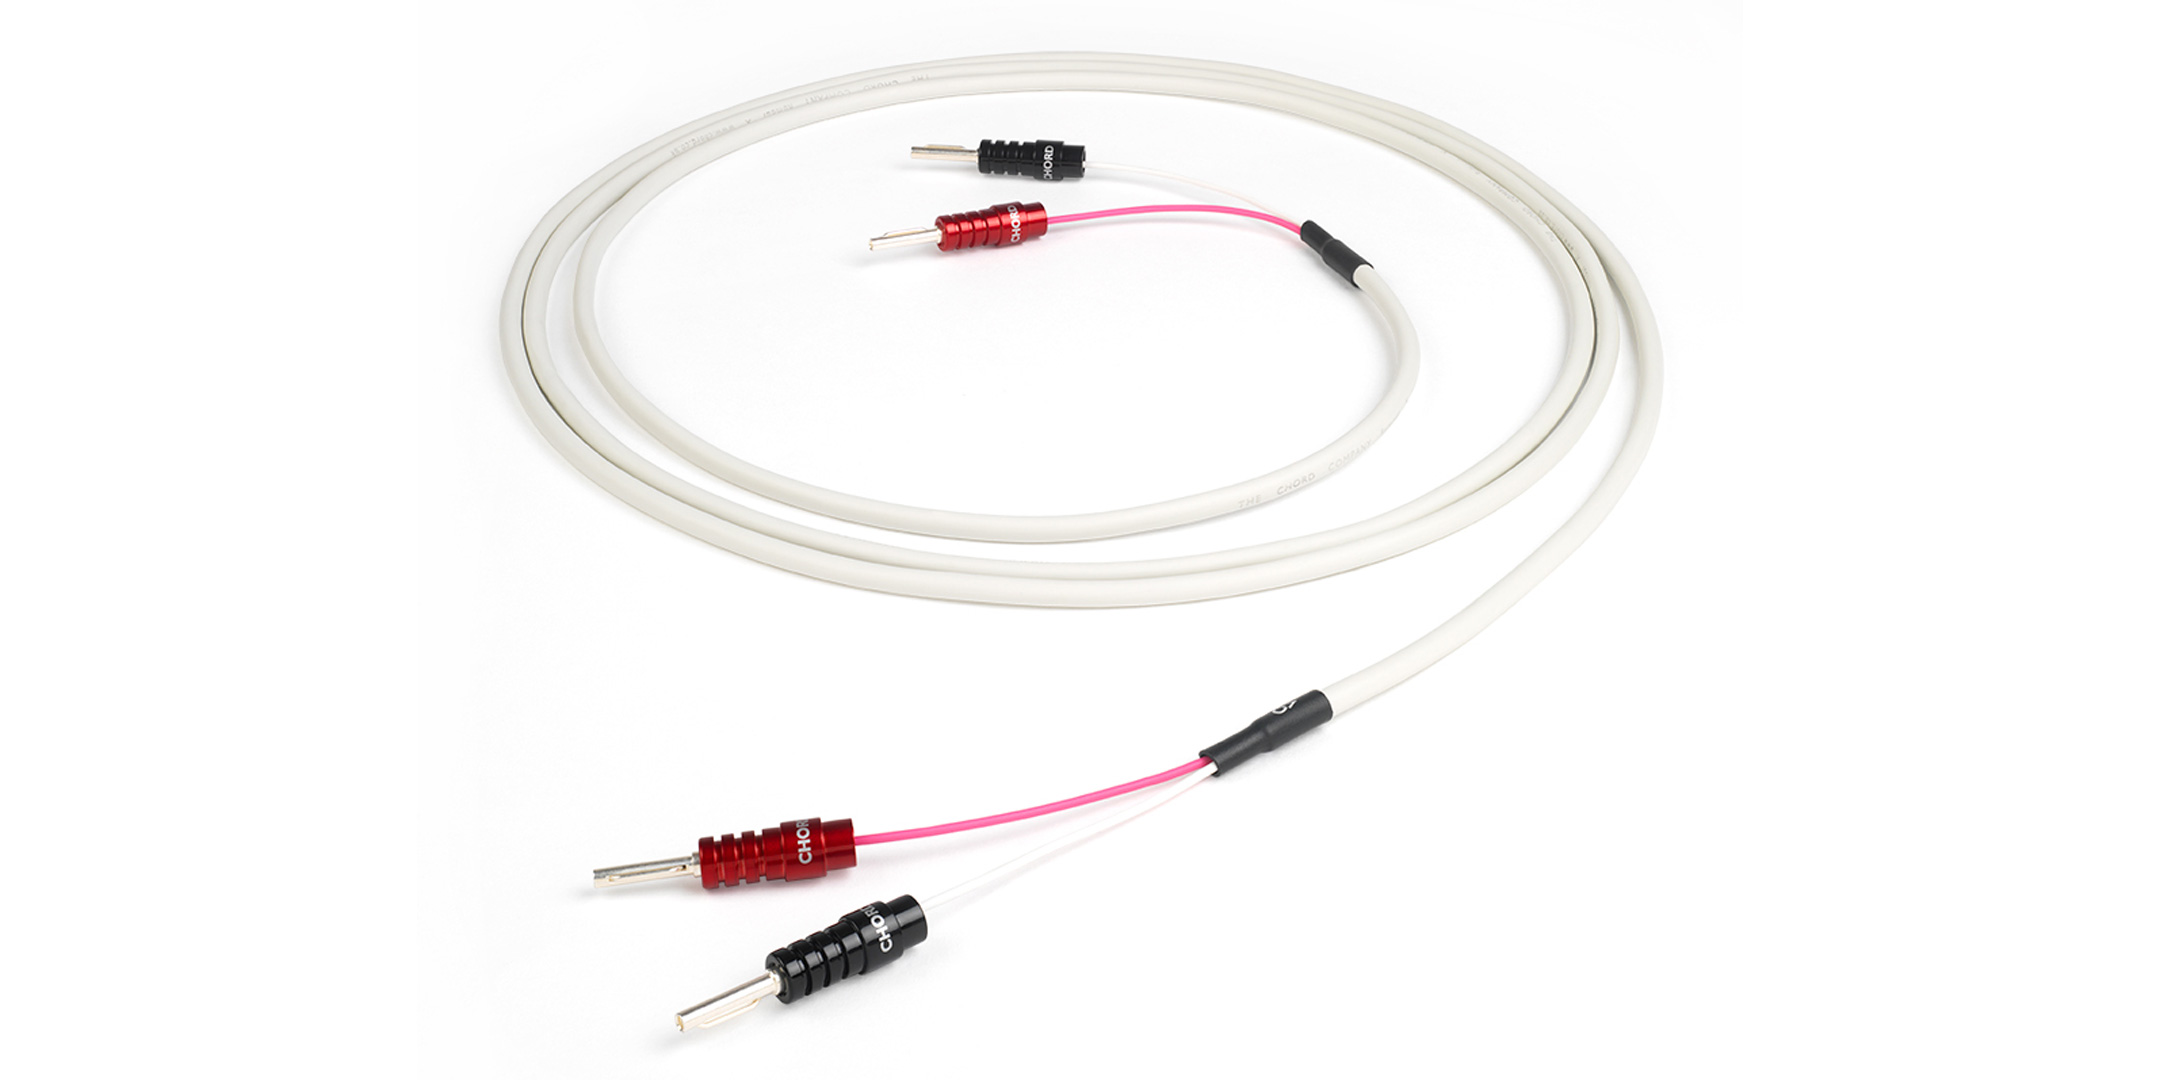 Pic showing a Chord Rumour 2 speaker cable on a white background